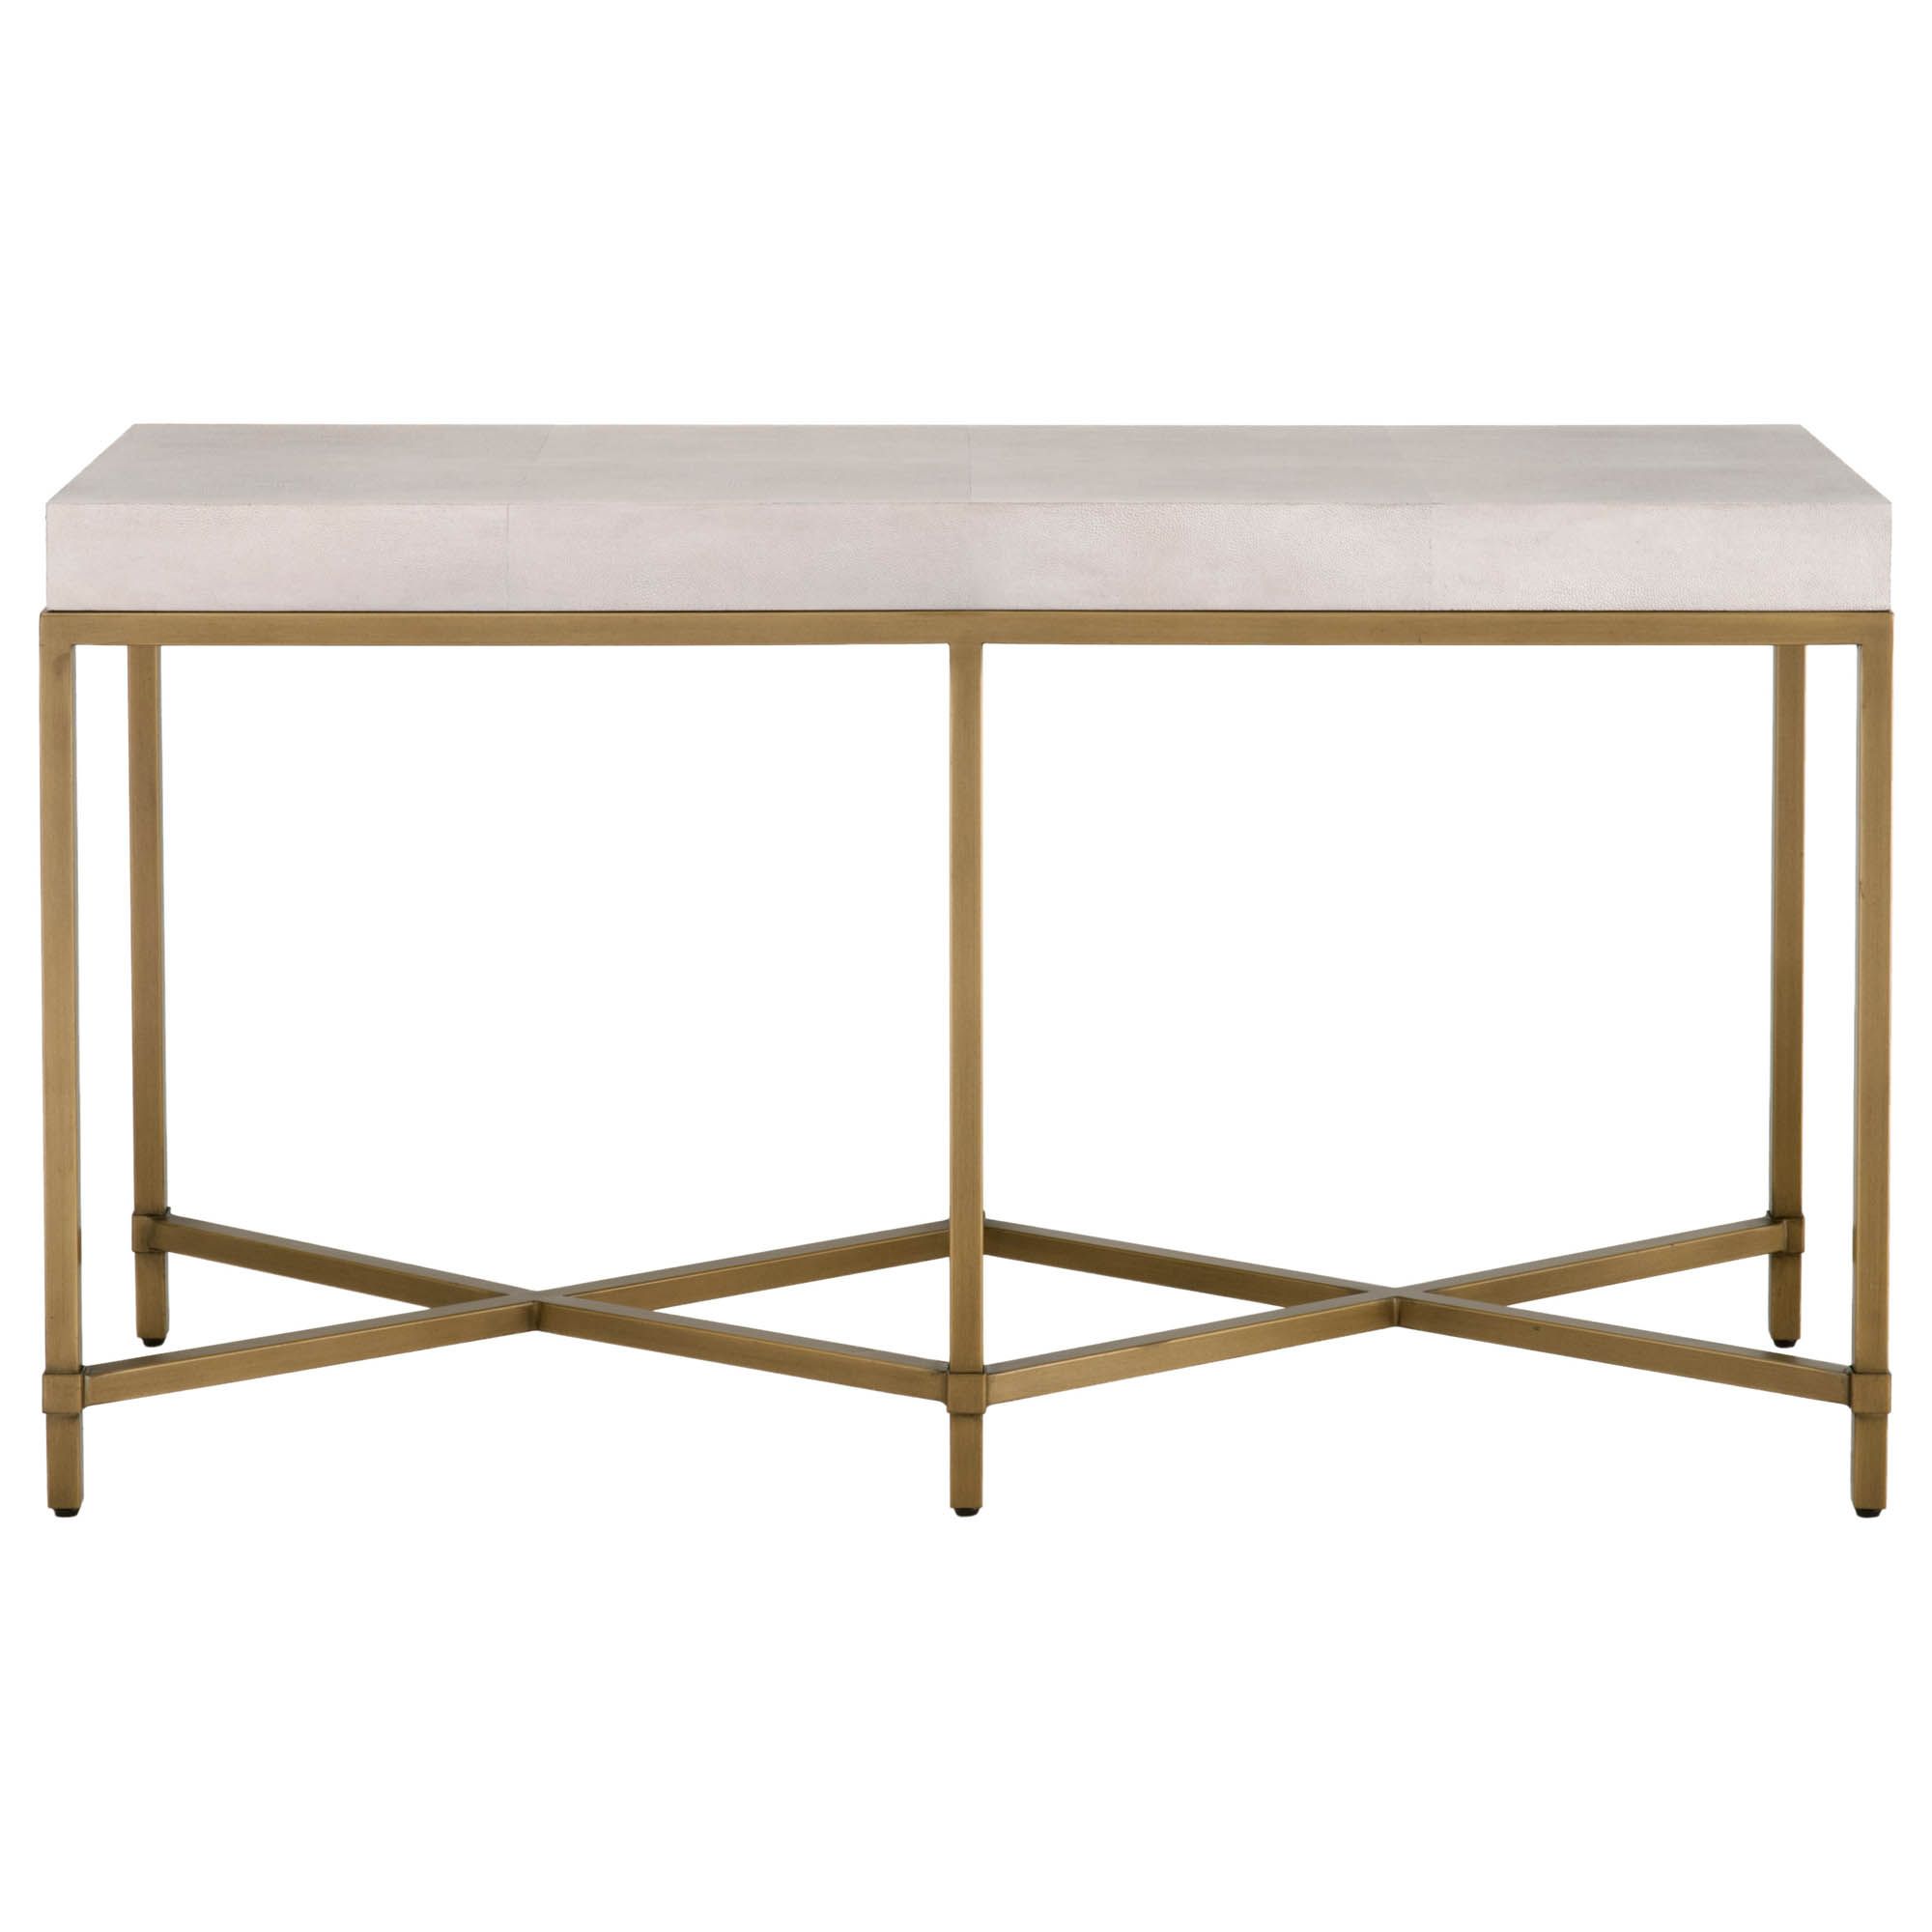 Strand Shagreen Console Table Inside Faux Shagreen Console Tables (View 12 of 30)